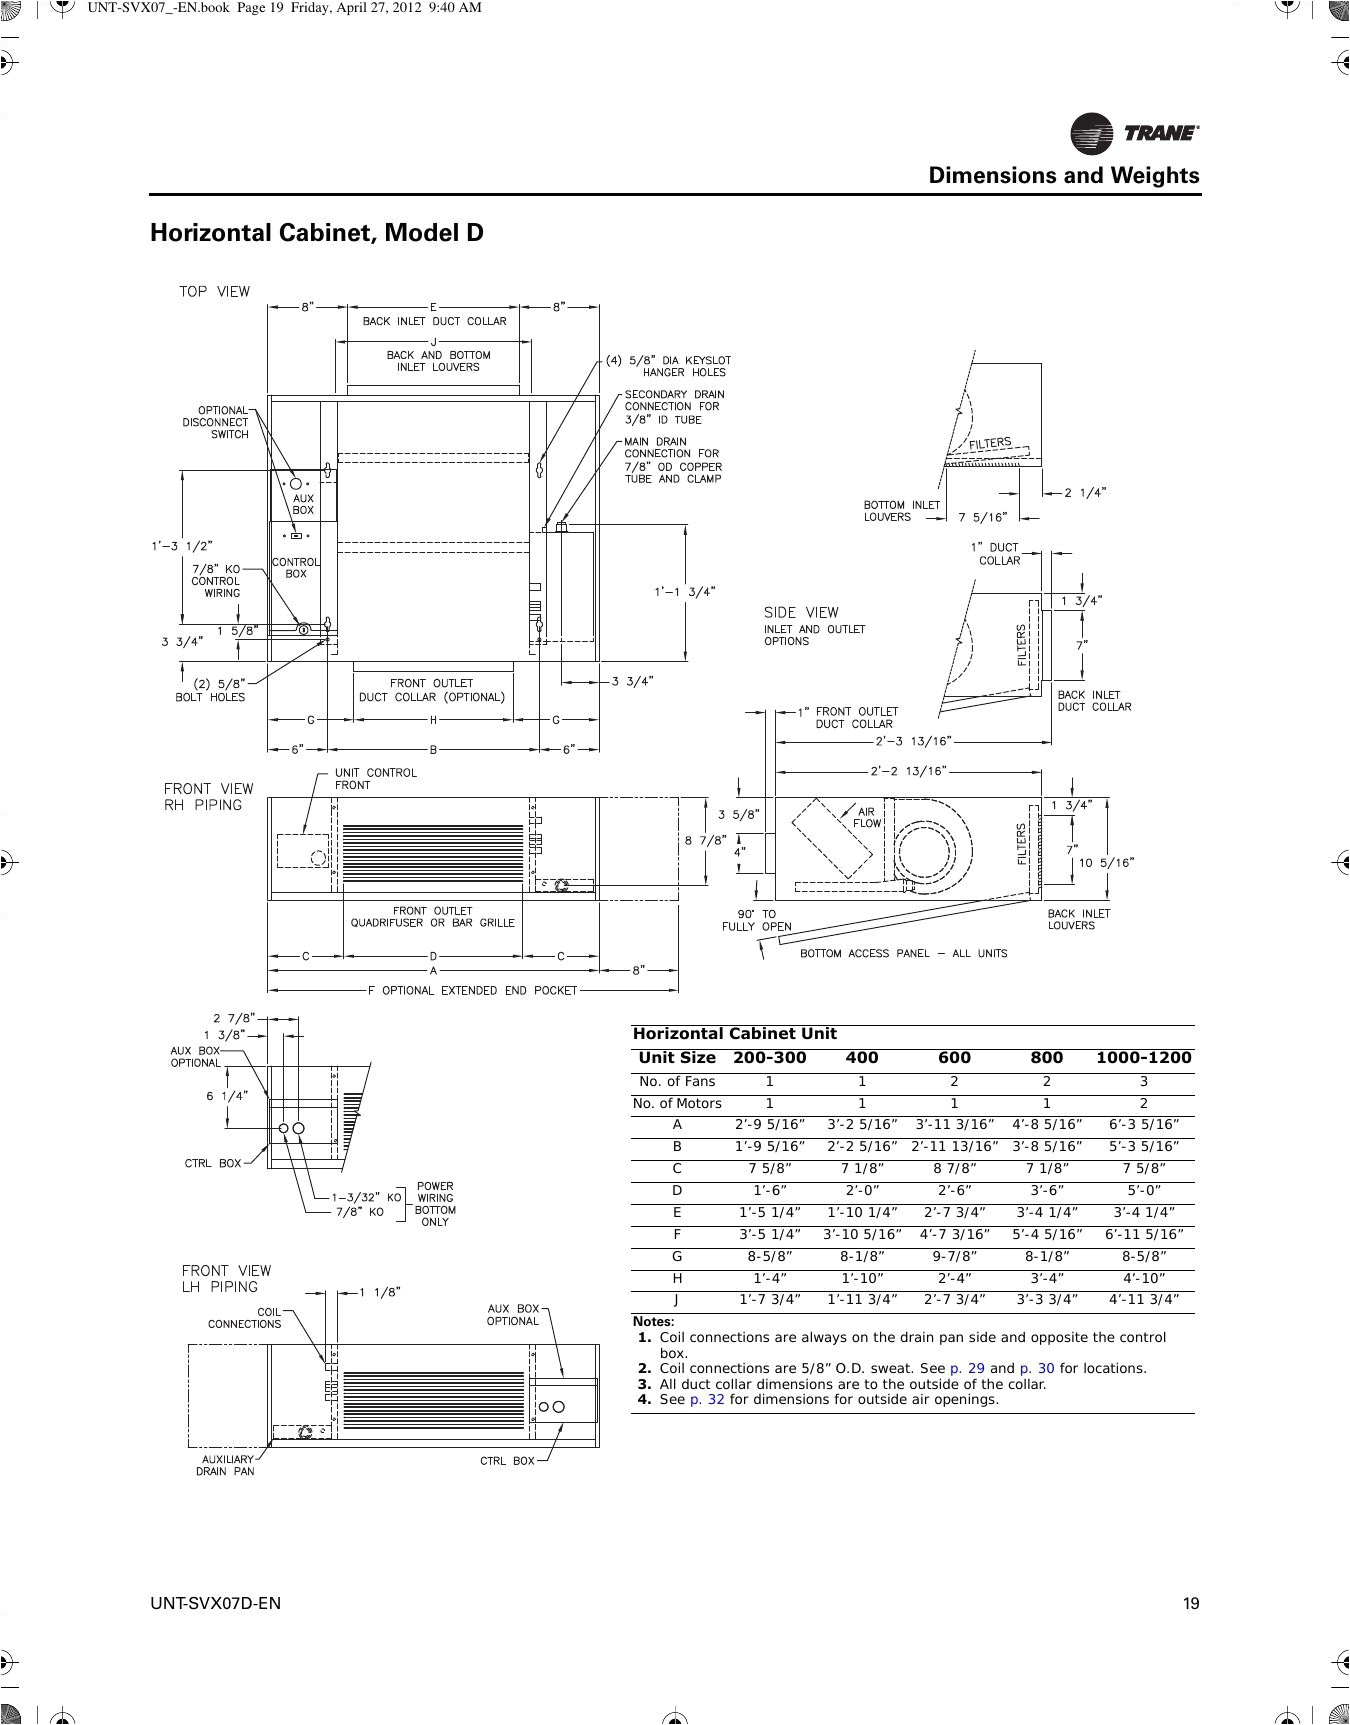 hubbell pressure switch wiring diagram awesome hubbell wiring diagram model j smart wiring diagrams e280a2 jpg